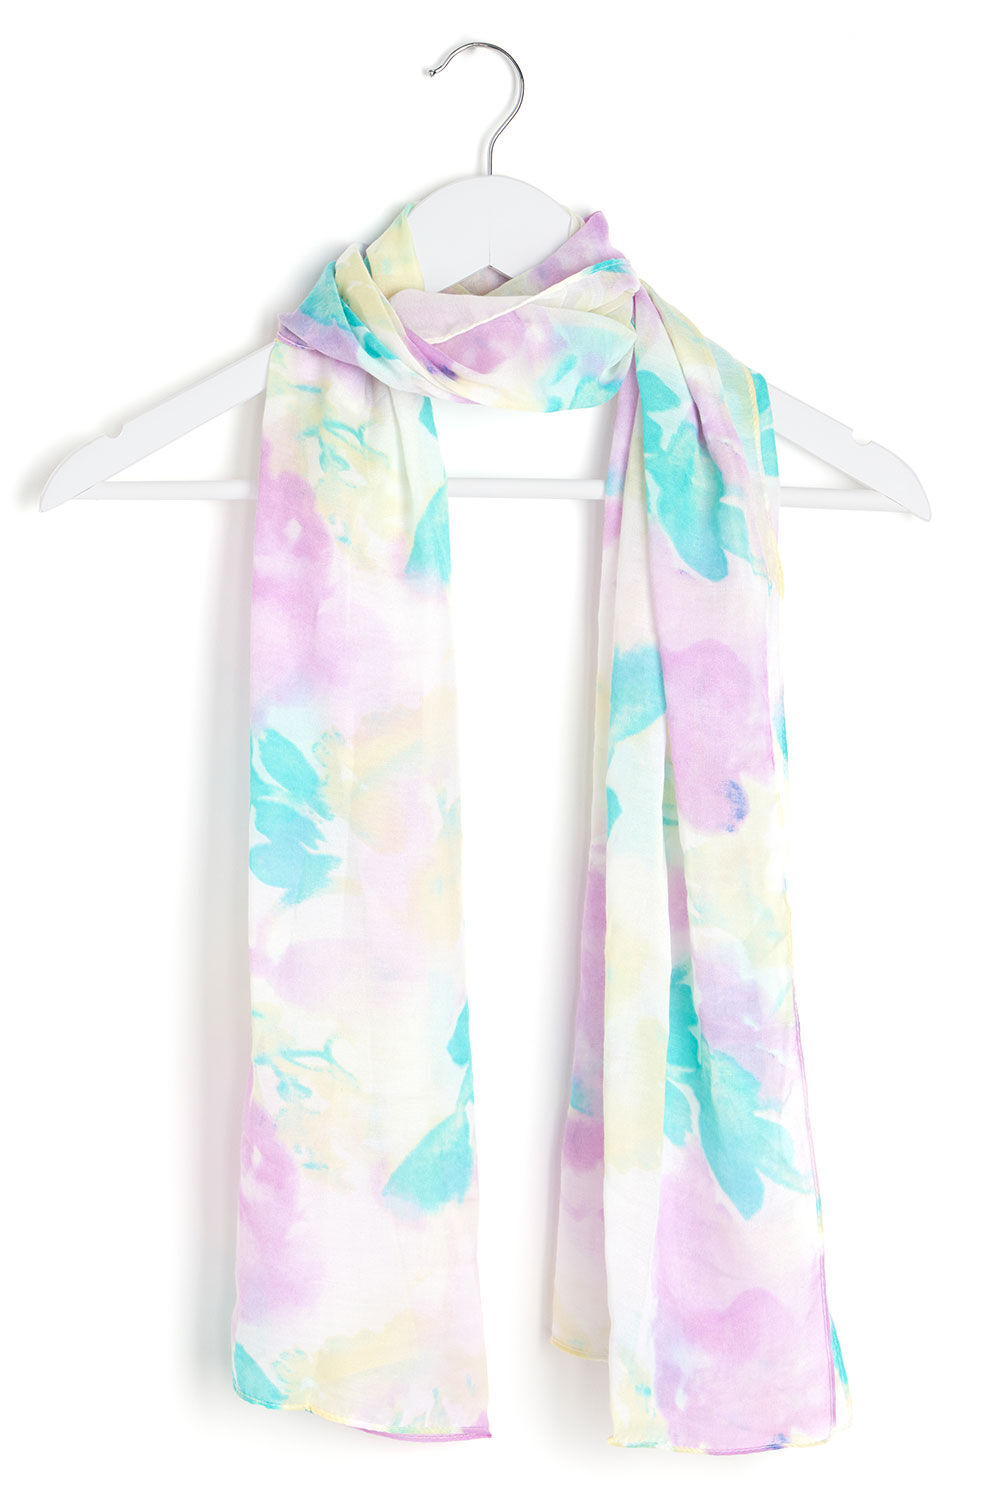 Bonmarche Lilac Floral and Striped Print Scarf, Size: One Size